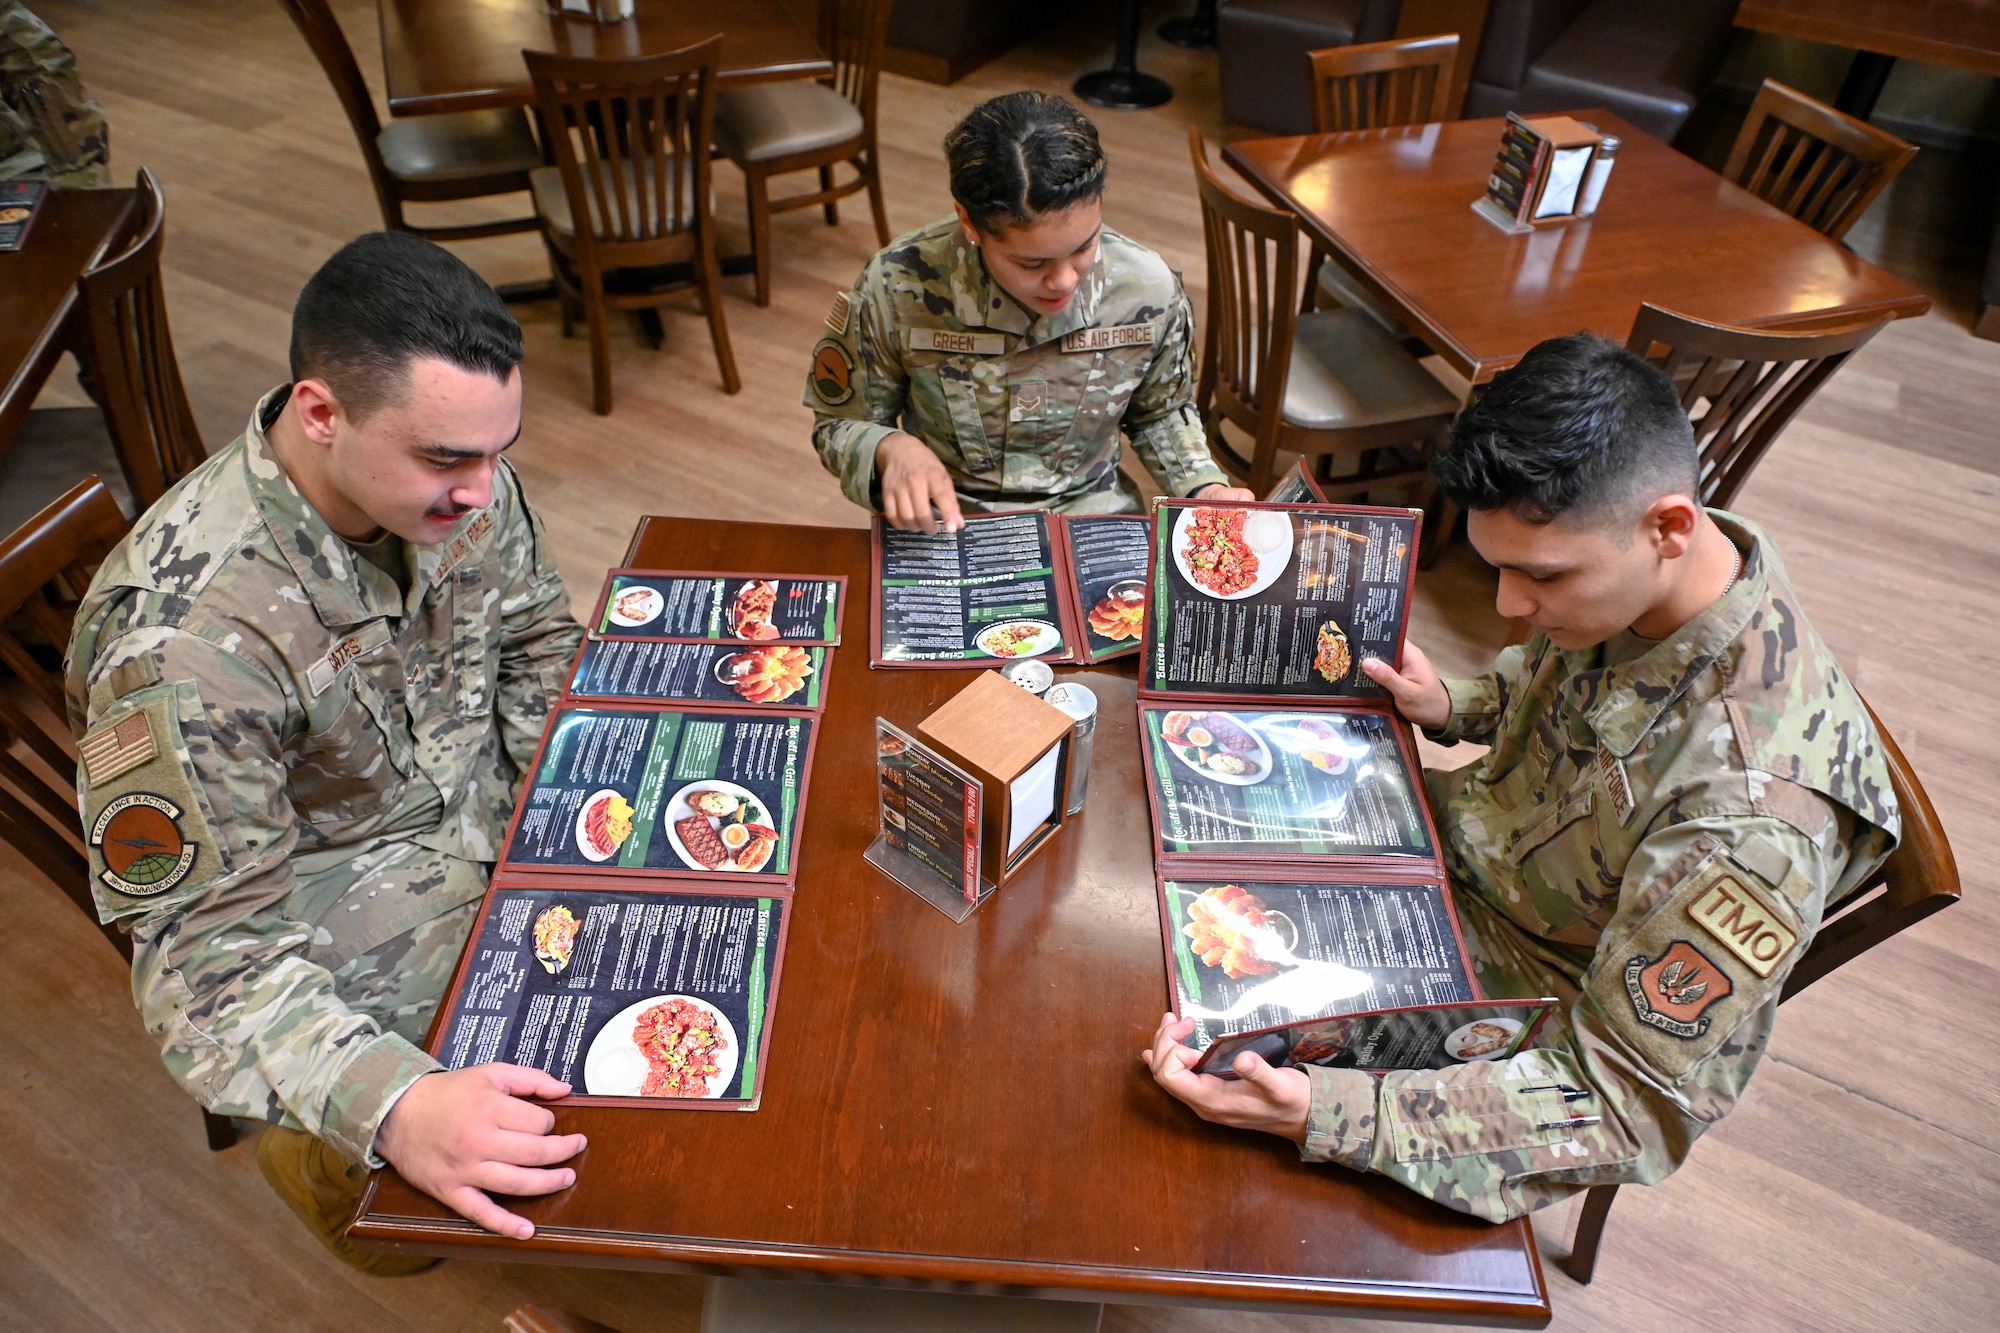 Airmen assigned to the 39th Air Base Wing look at the American Roadhouse menu as they are the first airmen to utilize the campus style dining at the Club Complex on Incirlik Air Base, Turkey, Aug. 26, 2022. This expansion of dining options allows for Airmen with meal cards to utilize them at all FSS dining facilities. The Air Force Campus Style Dining System collaborated with Incirlik AB to implement this pilot program, making Incirlik AB the first base in USAFE-AFAFRICA to introduce campus style dining. (U.S. Air Force photo by Senior Airman Joshua T. Crossman)